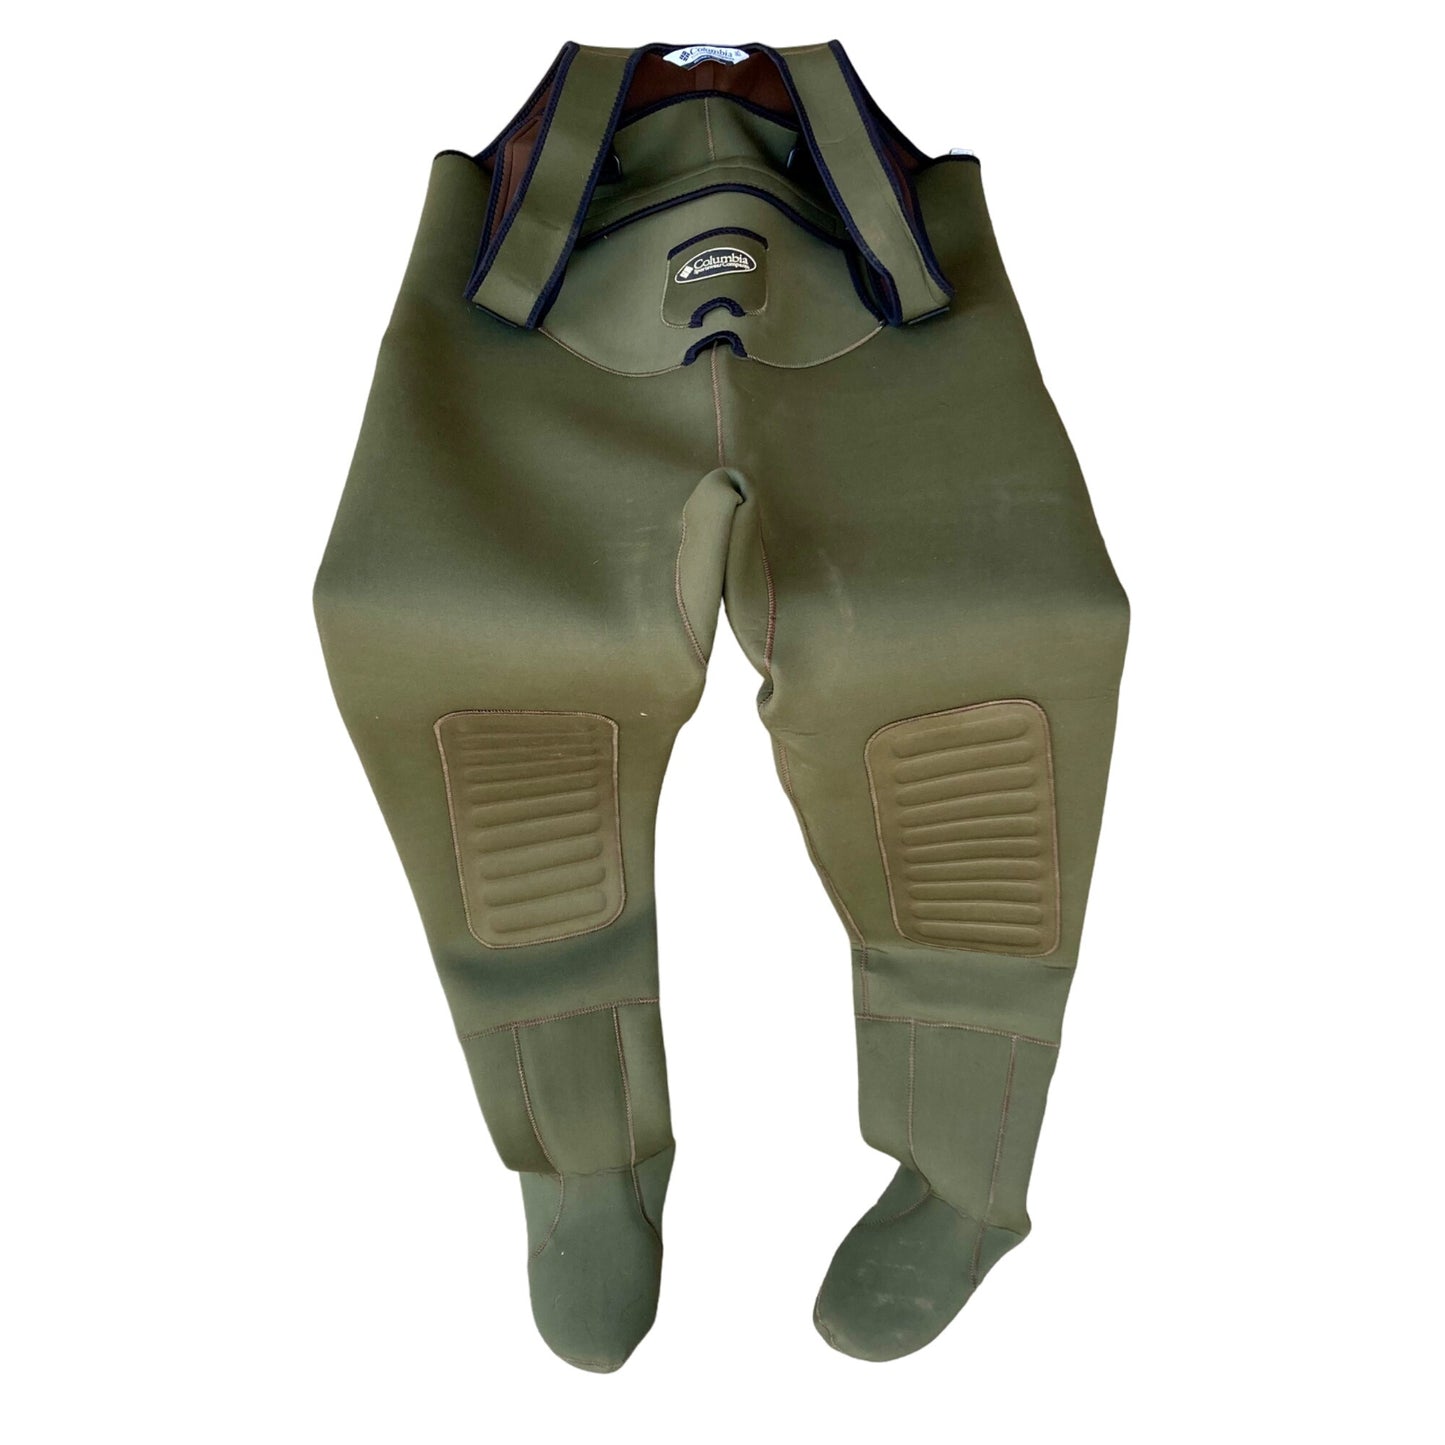 Columbia Neoprene Stocking Foot Chest Waders PFG Size Large Fly Fishing